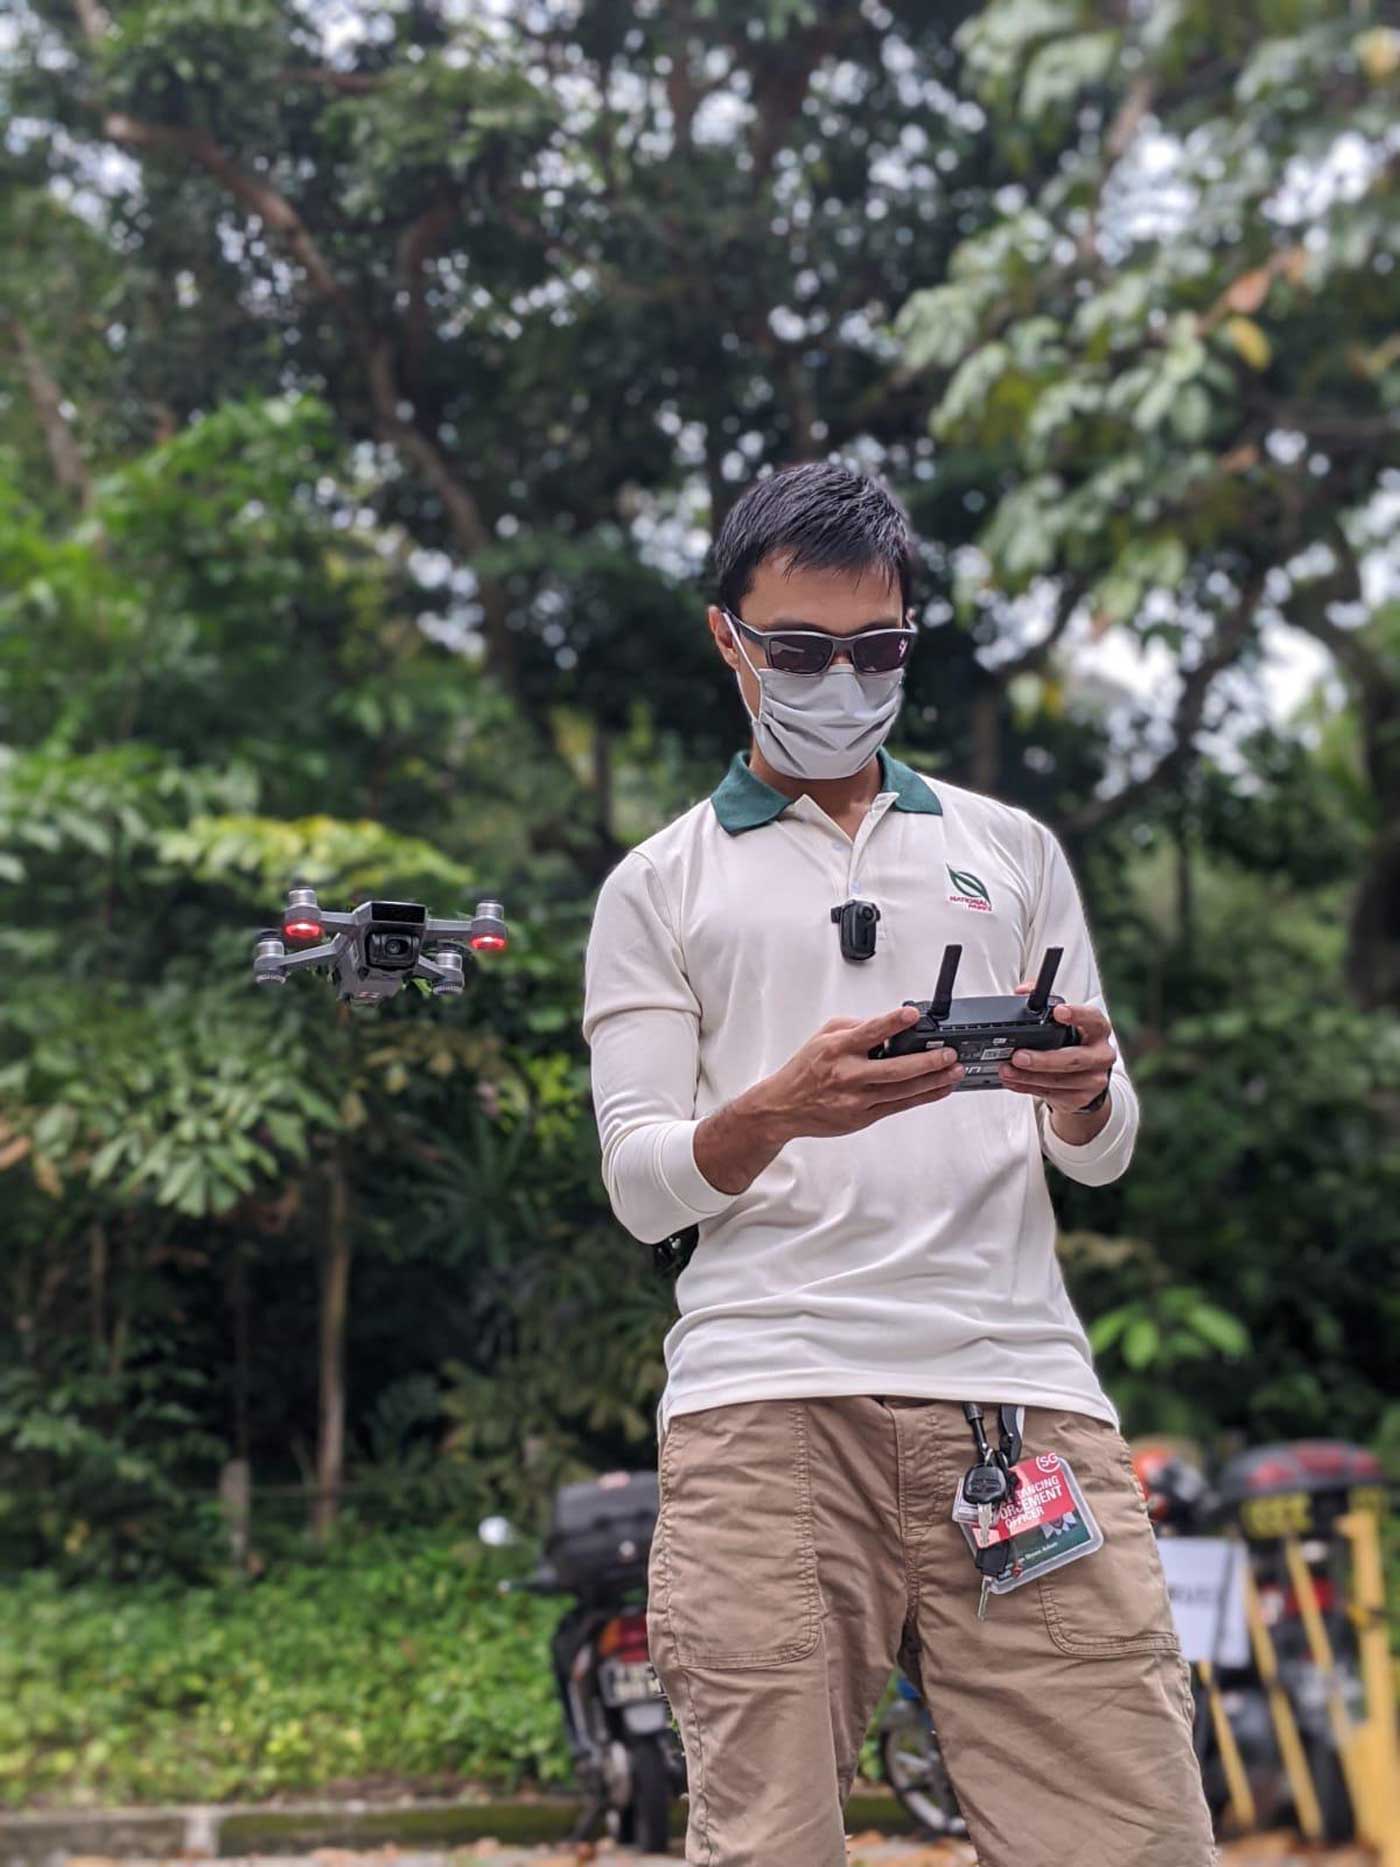 Using drones to monitor visitor levels